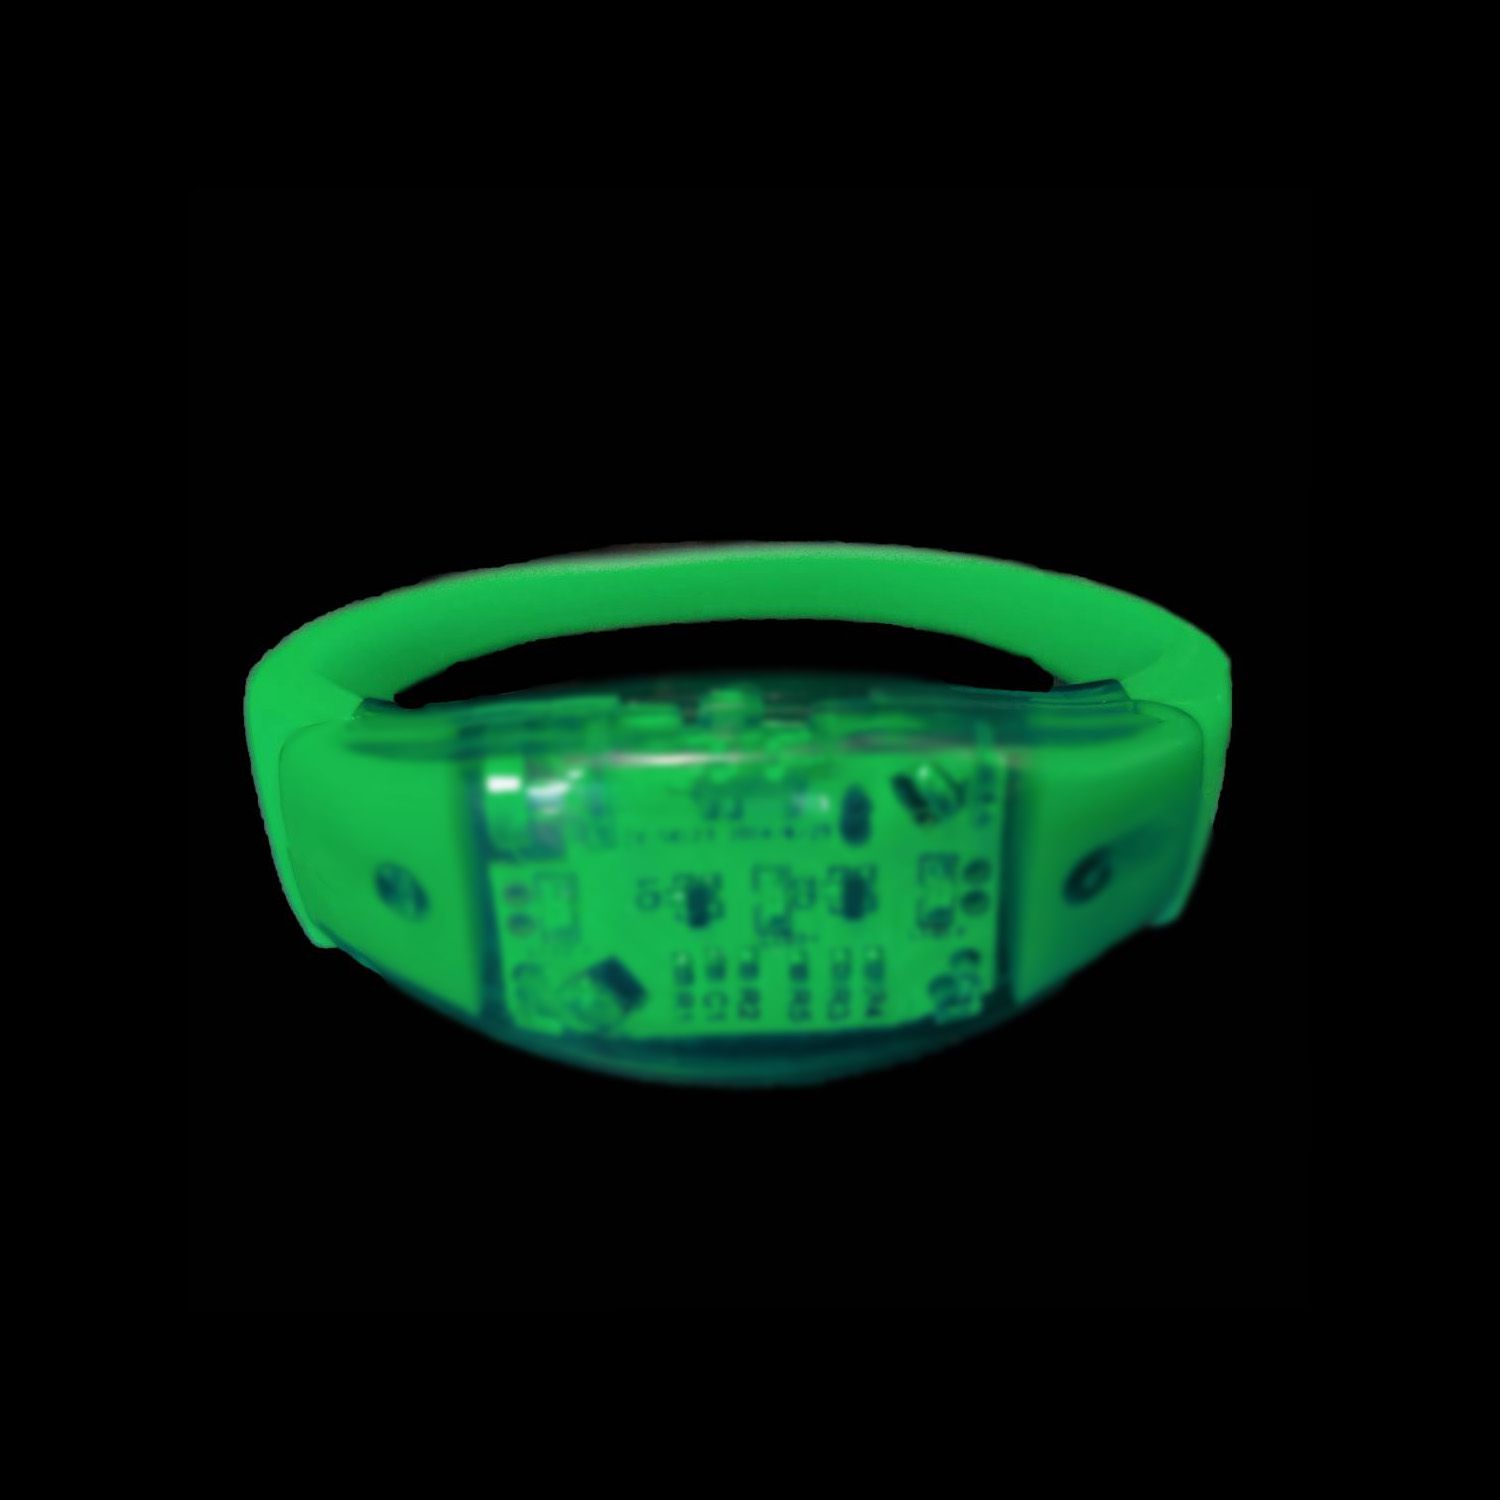 Sound activated LED armband Groen